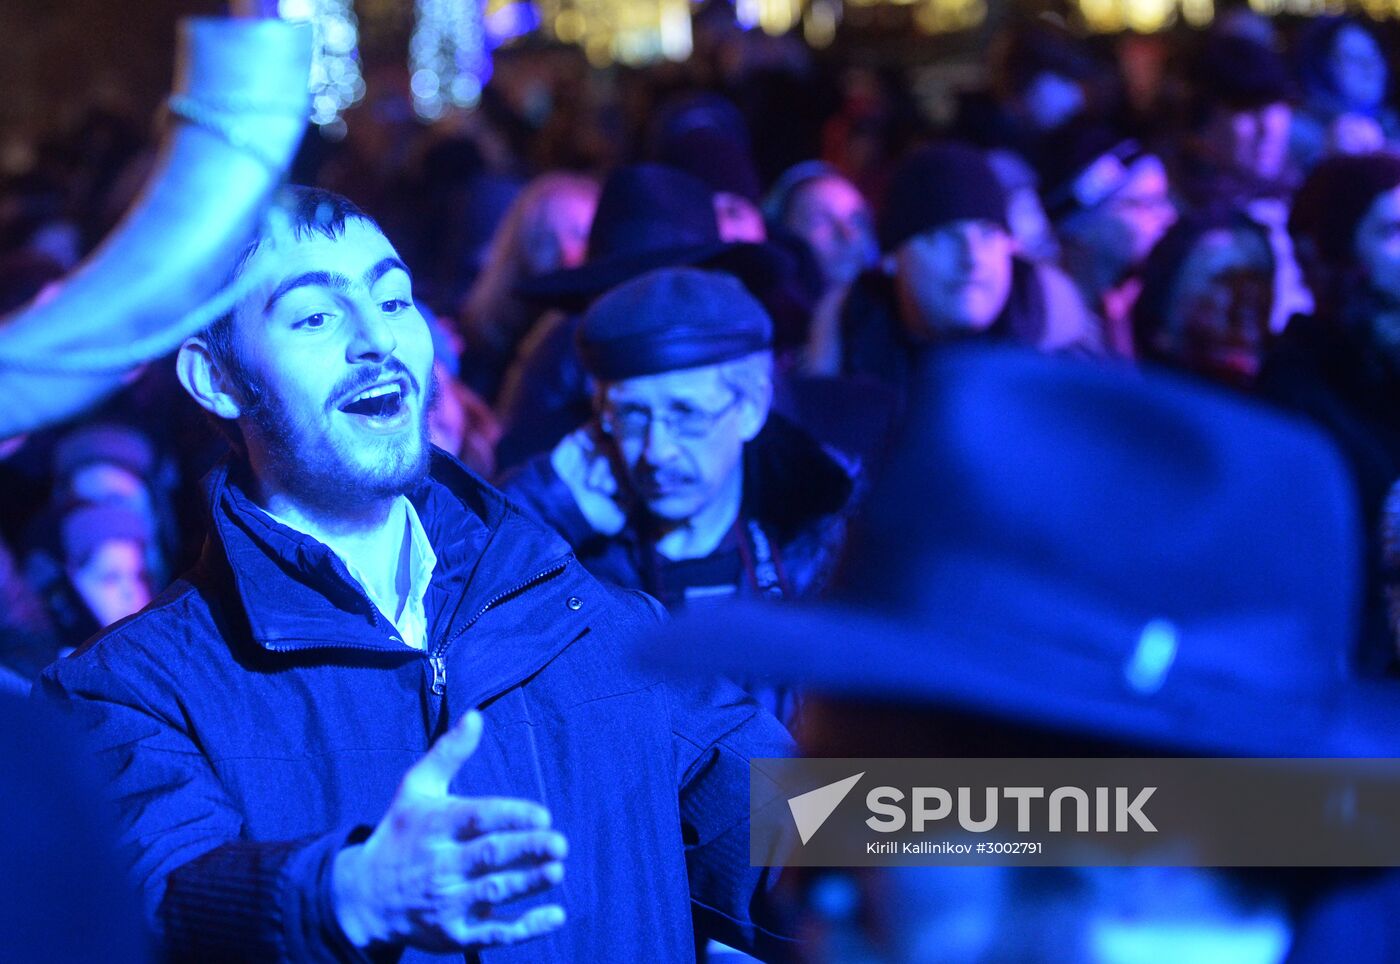 Procedure for lighting Chanukah candles on Revolution Square in Moscow